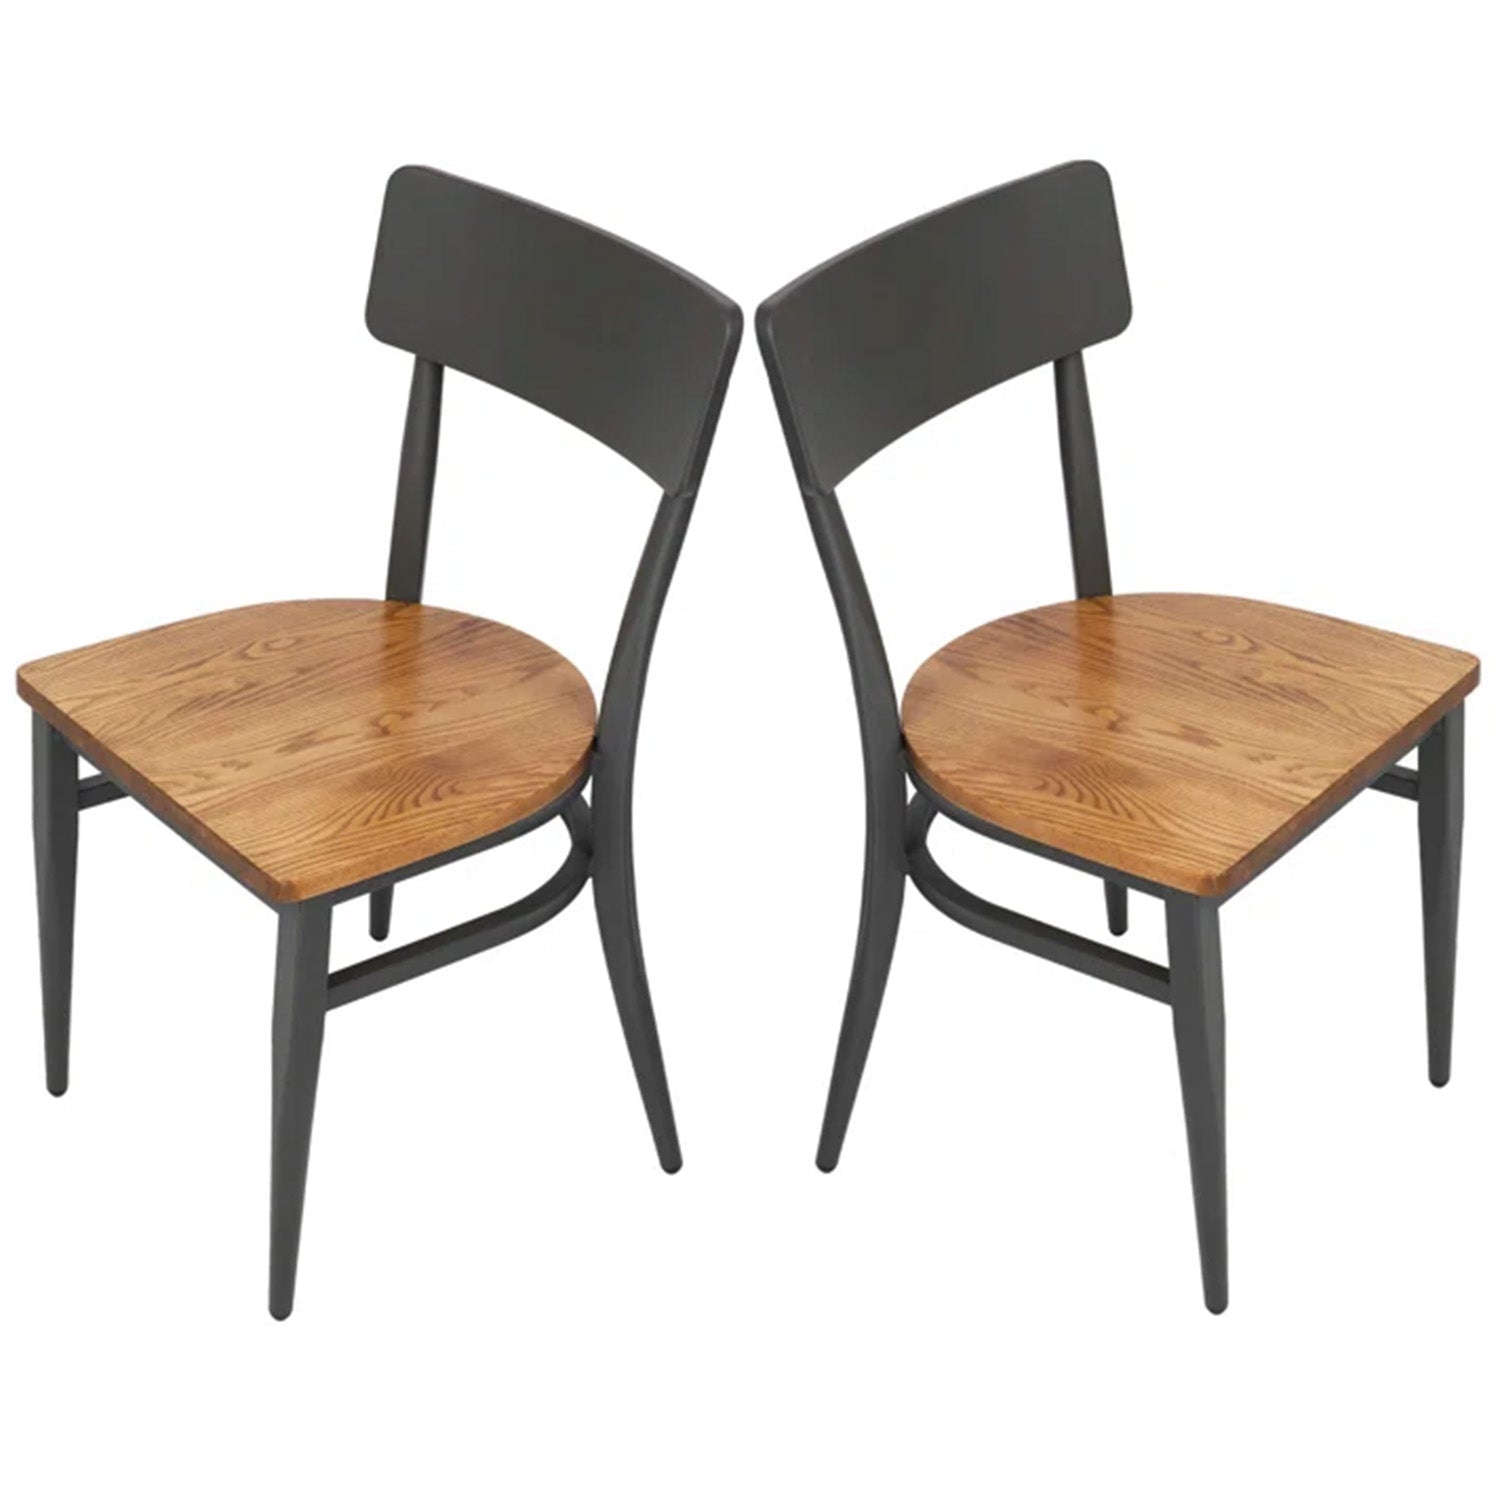 Set of 2 Mid-Century Wooden Dining Chairs Metal Solid Wood Kitchen Chair, Open π Back